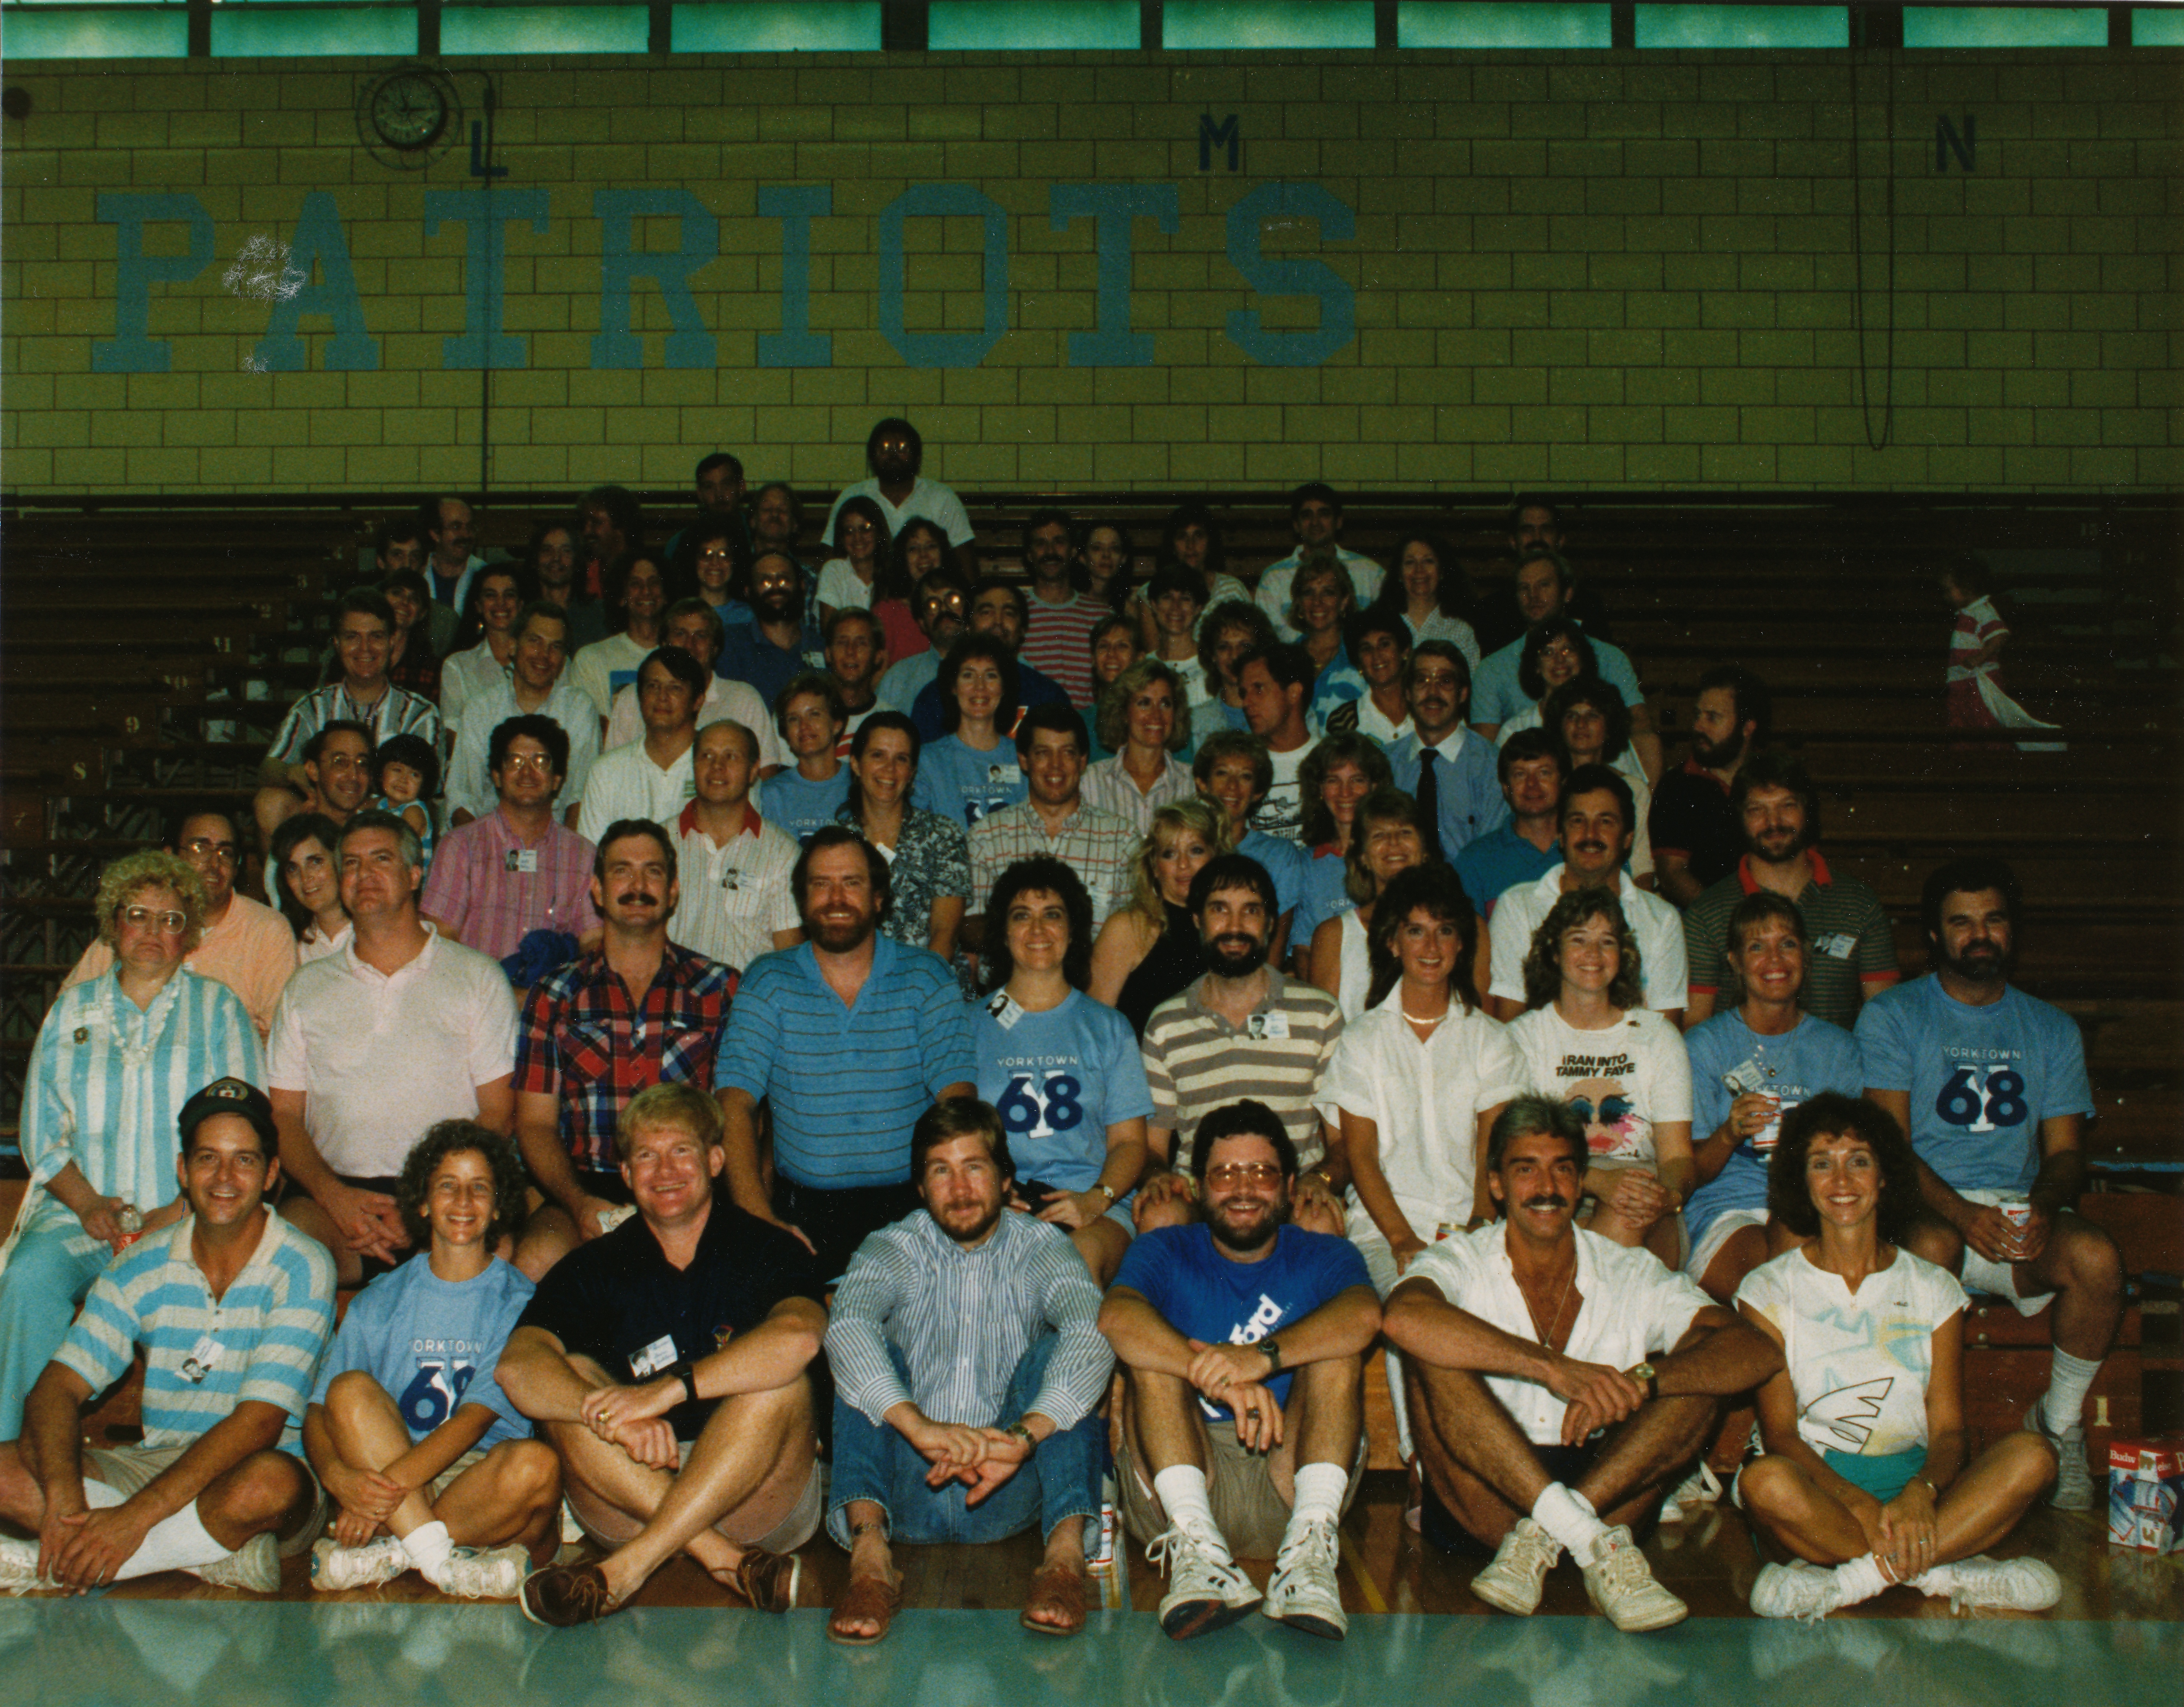 YHS CLASS OF '68 20TH REUNION IN THE YORKTOWN GYM    (CLICK TO ENLARGE)